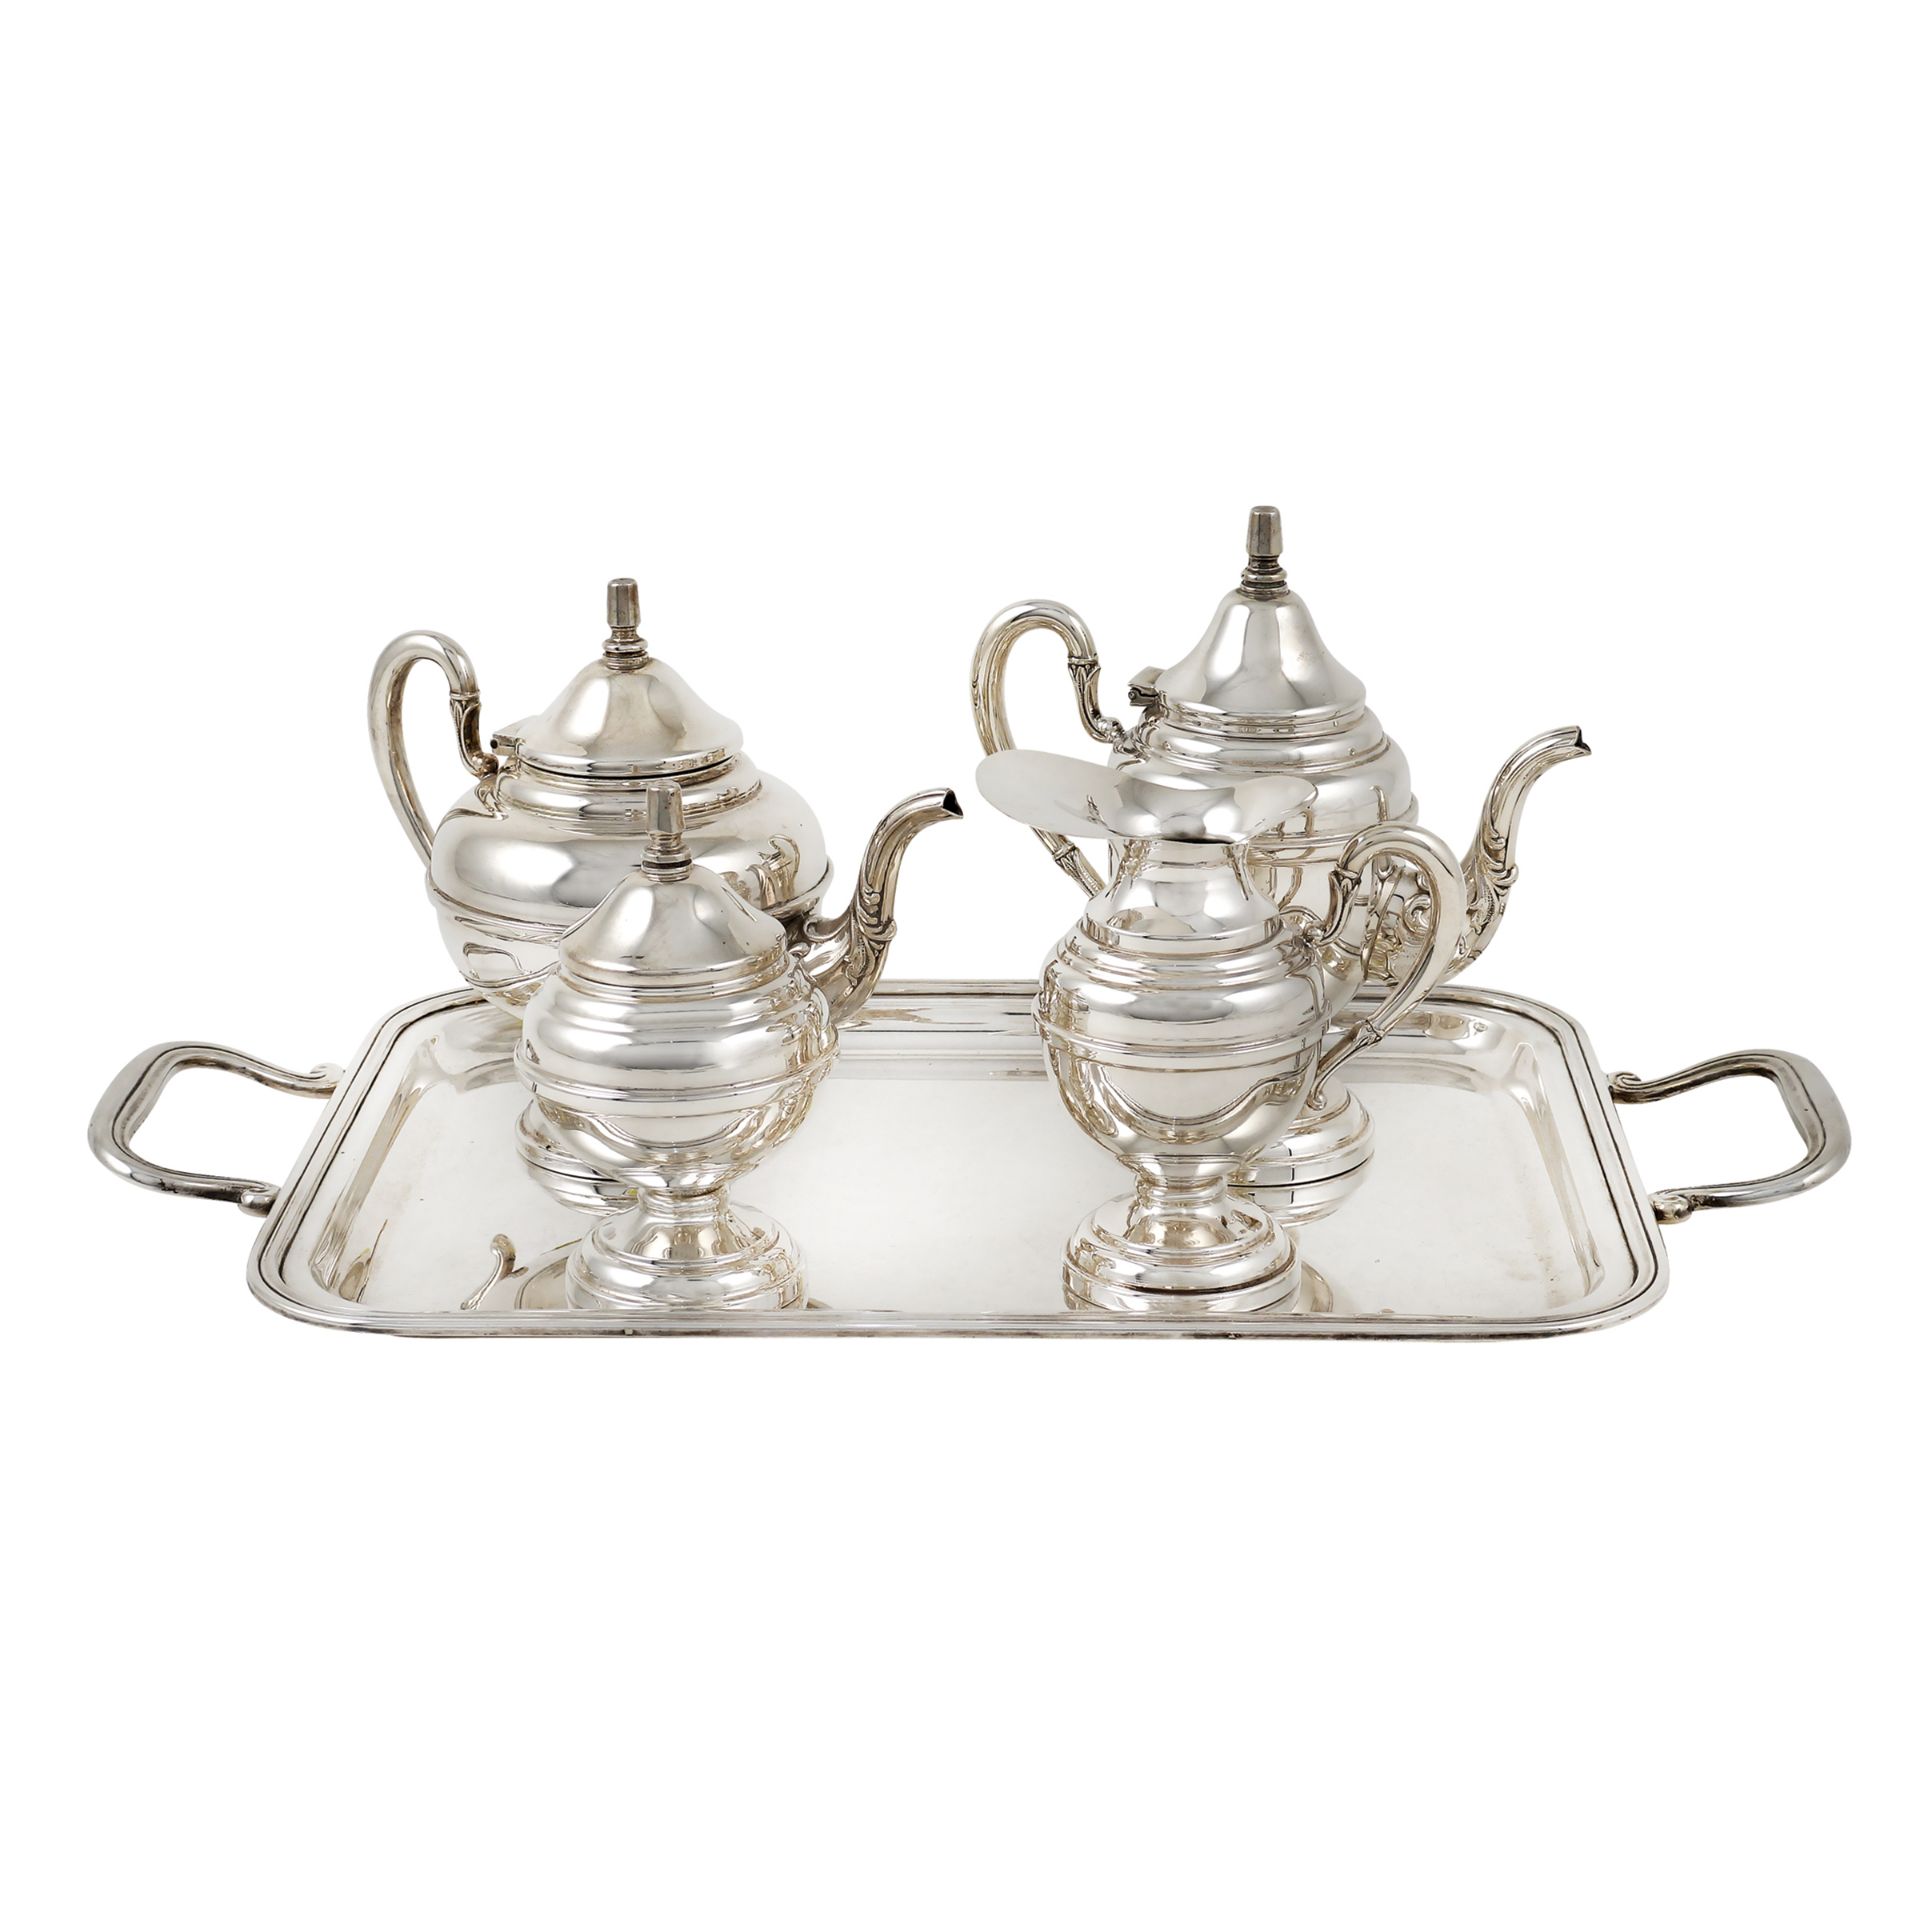 A silver tea and coffee set Italy, 20th century peso 1501 gr.